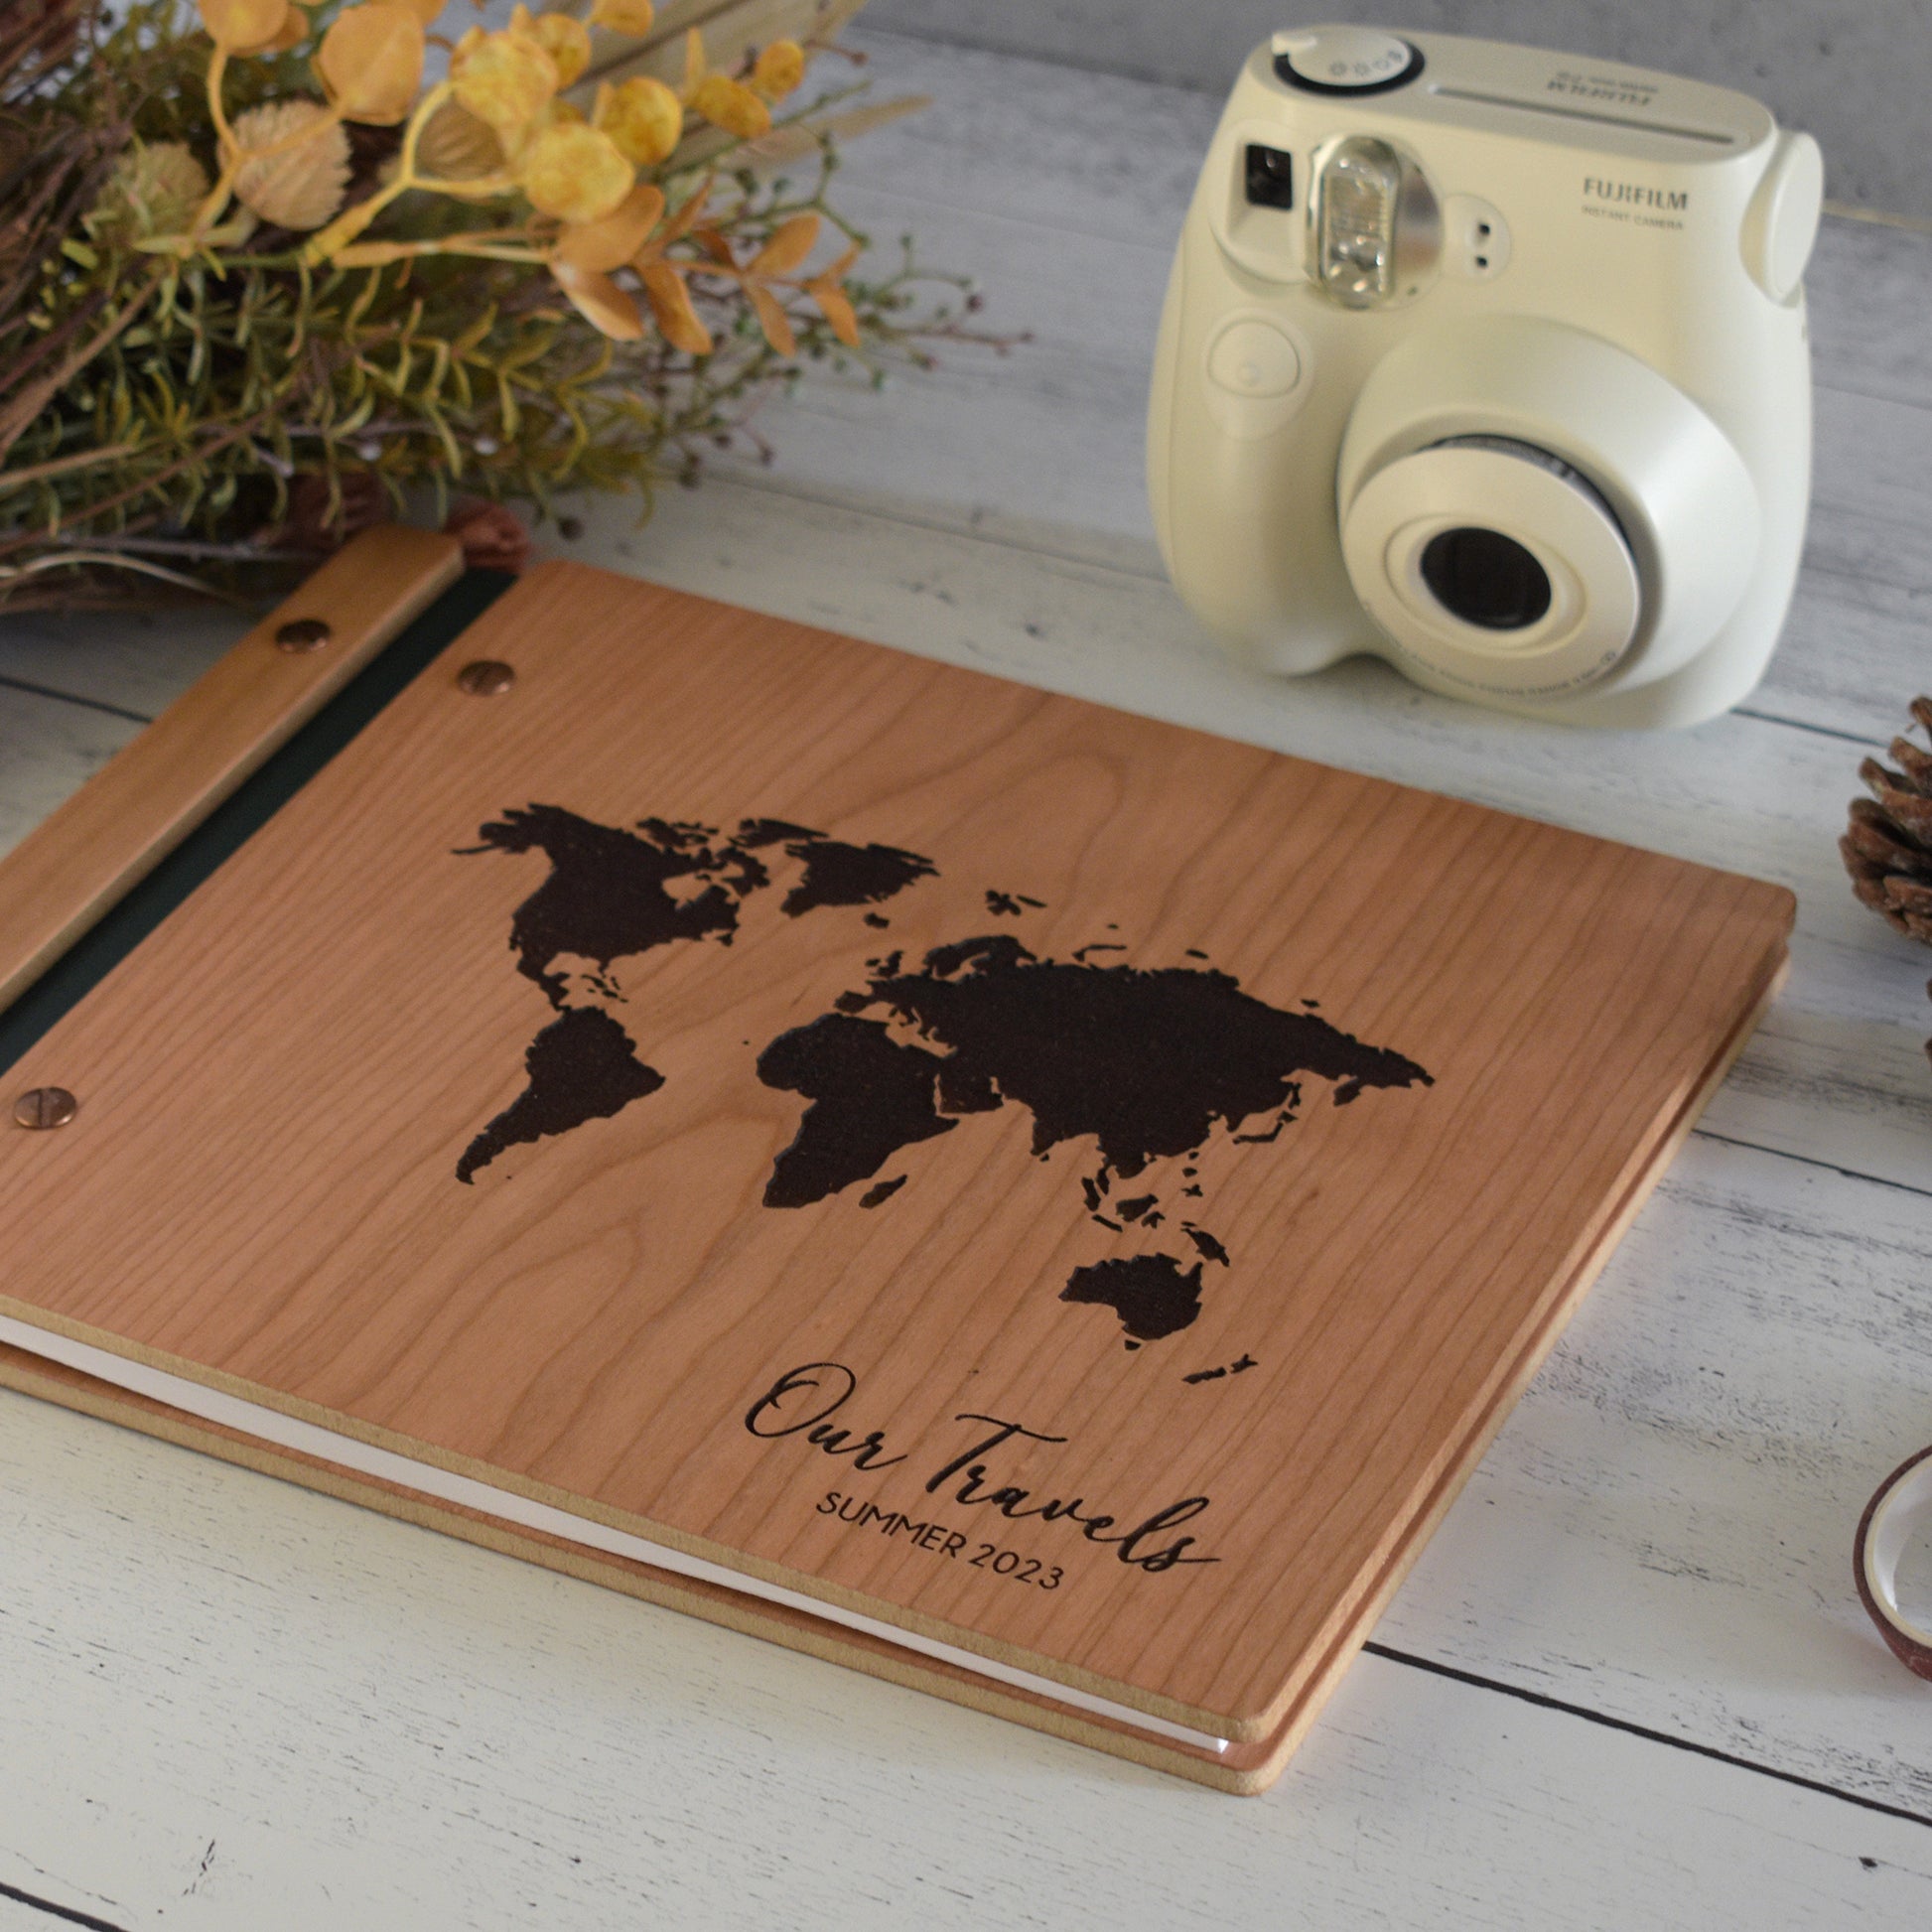 An 8.5x11"guest book lies on a table. Made of cherry wood, black vegan leather binding, and copper hardware. The front cover has en engraved world map and reads Our Travels, Summer 2023.